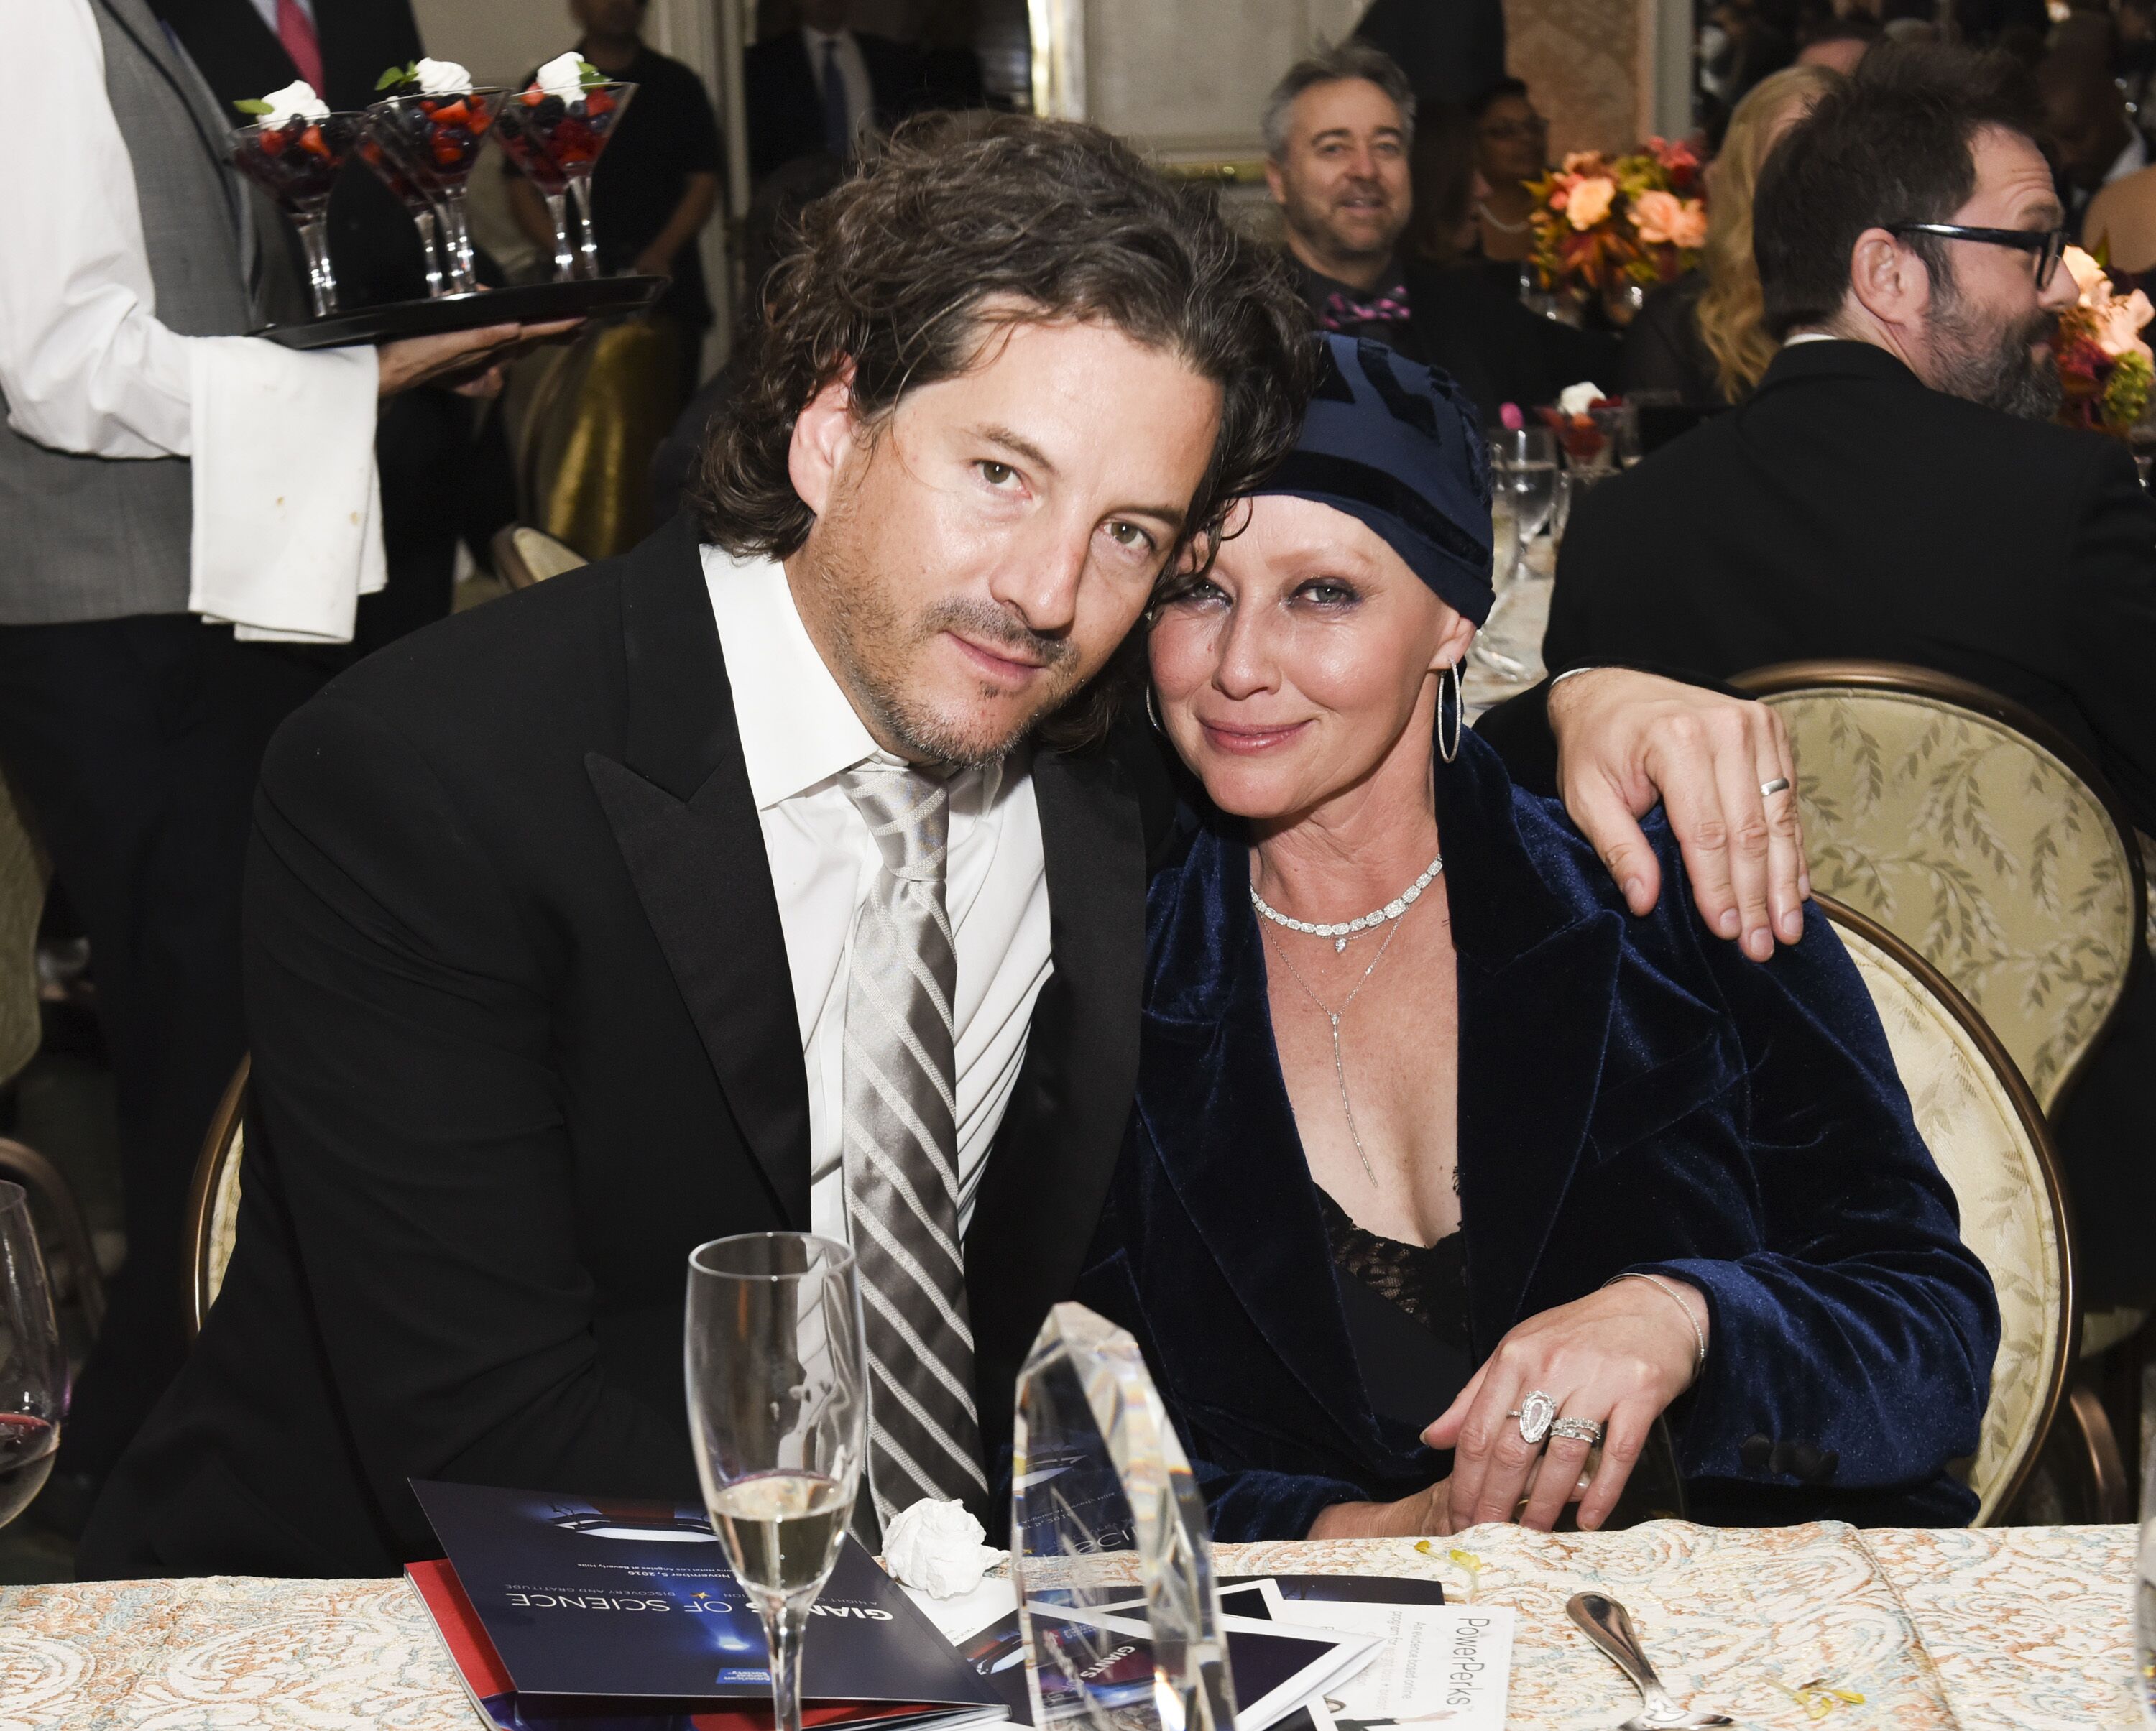 Kurt Iswarienko and Shannen Doherty at the American Cancer Society's Giants of Science Los Angeles Gala in 2016 | Photo: Getty Images